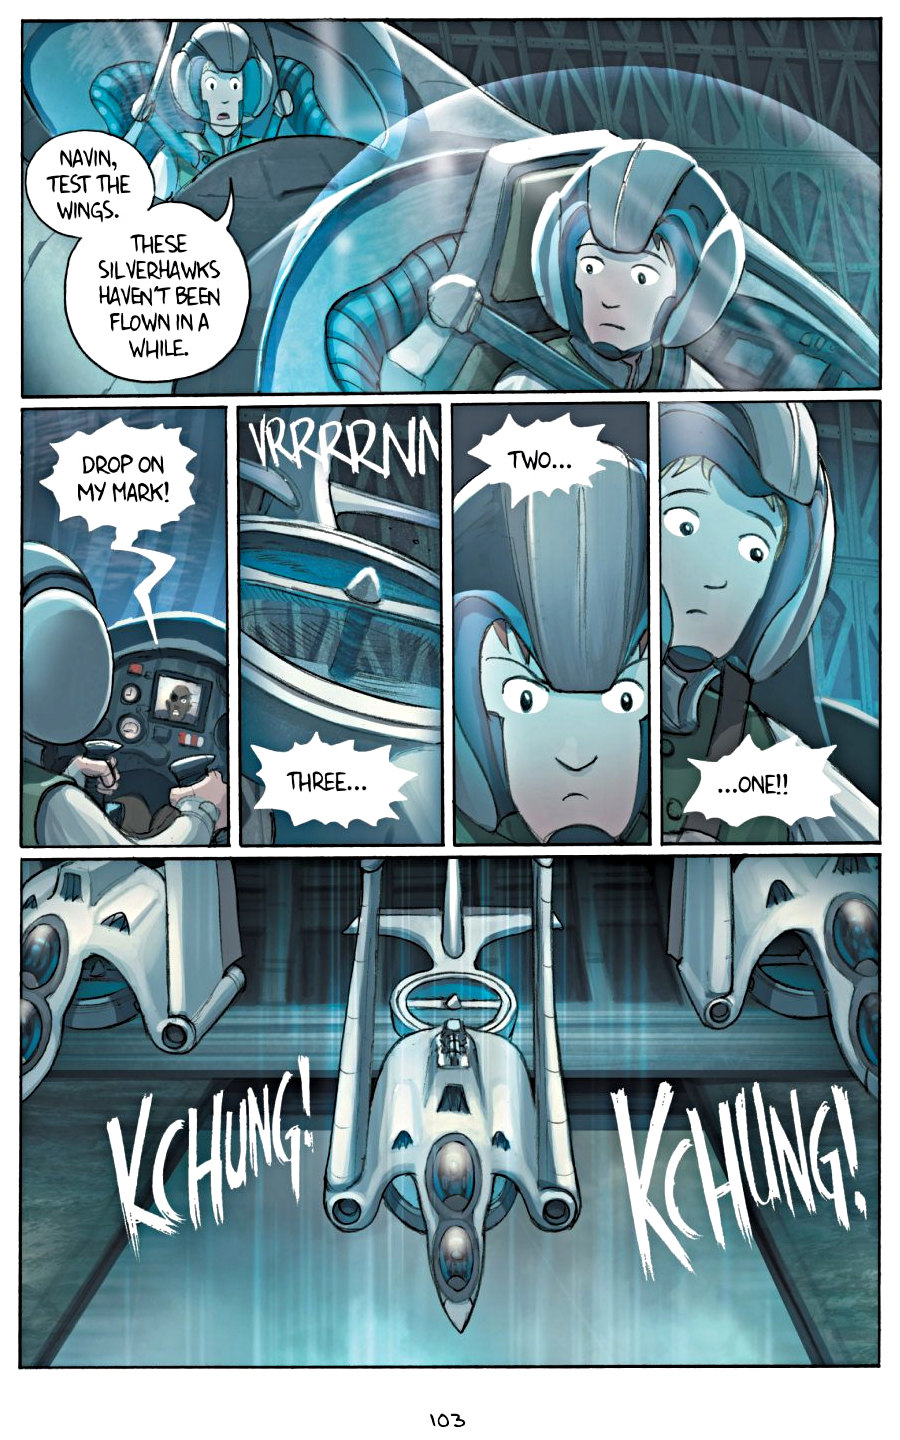 page 103 of amulet 5 prince of the elves graphic novel